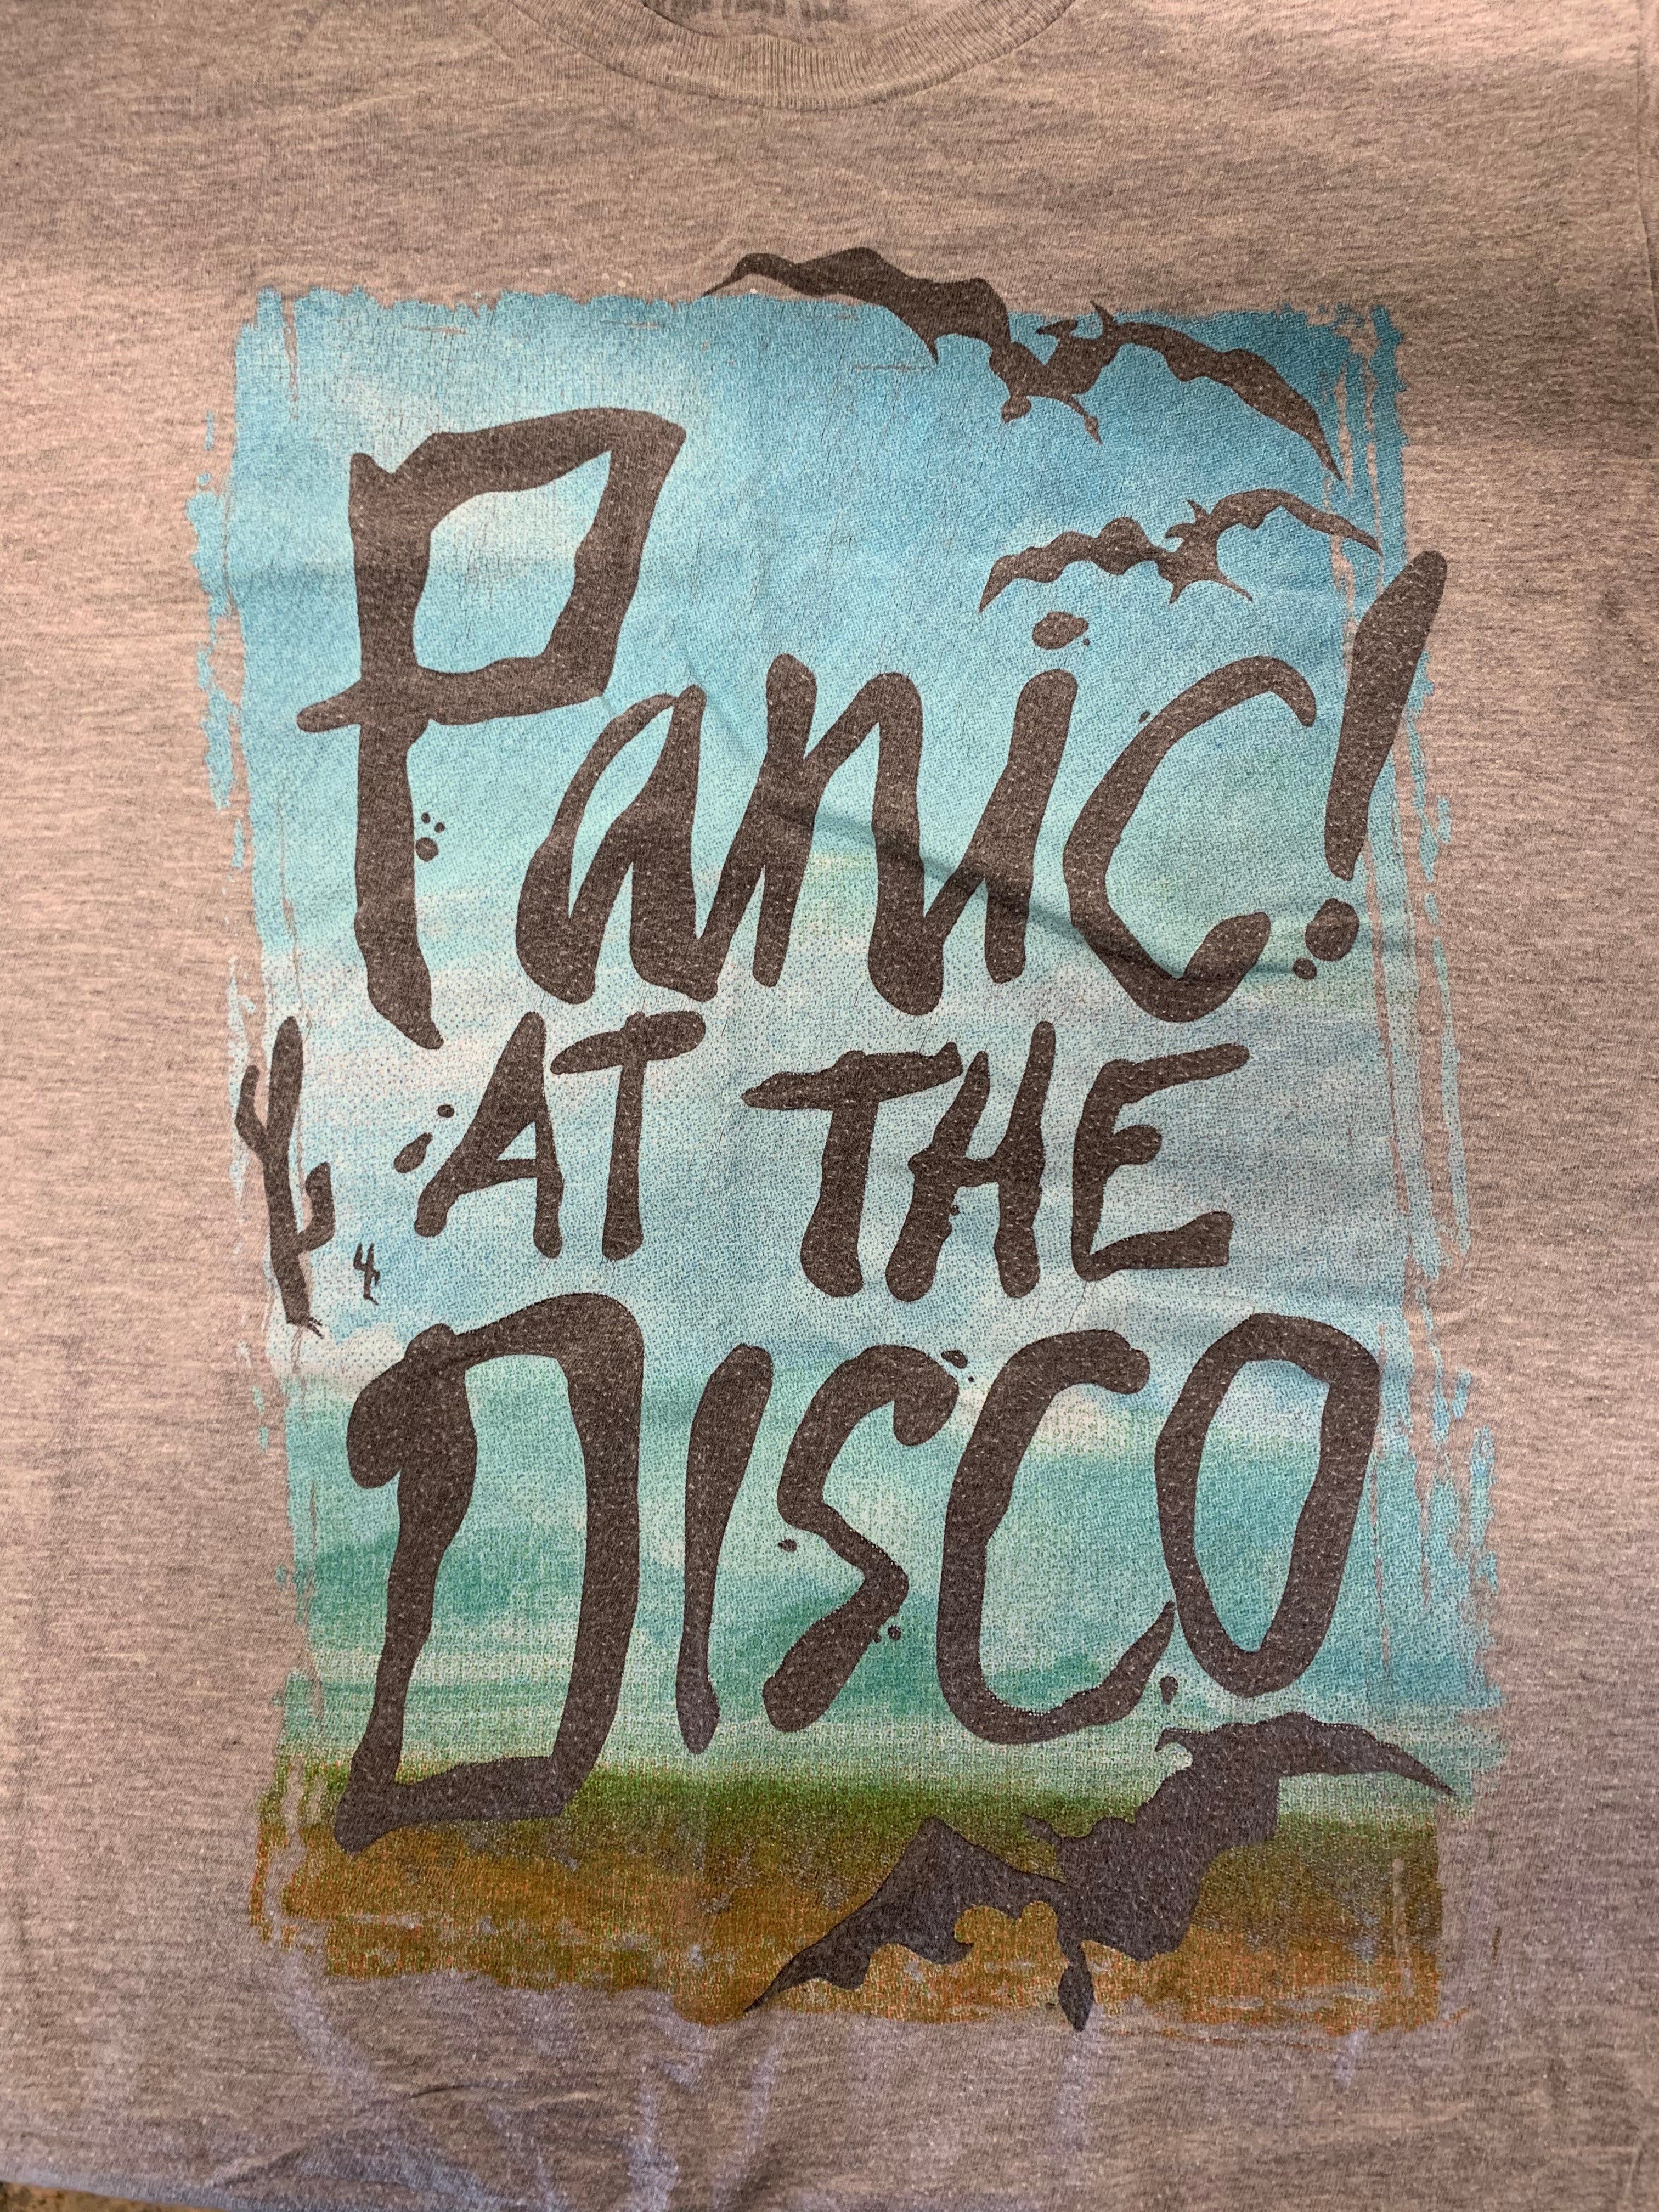 Panic At The Disco Landscape T-Shirt, Gray, M